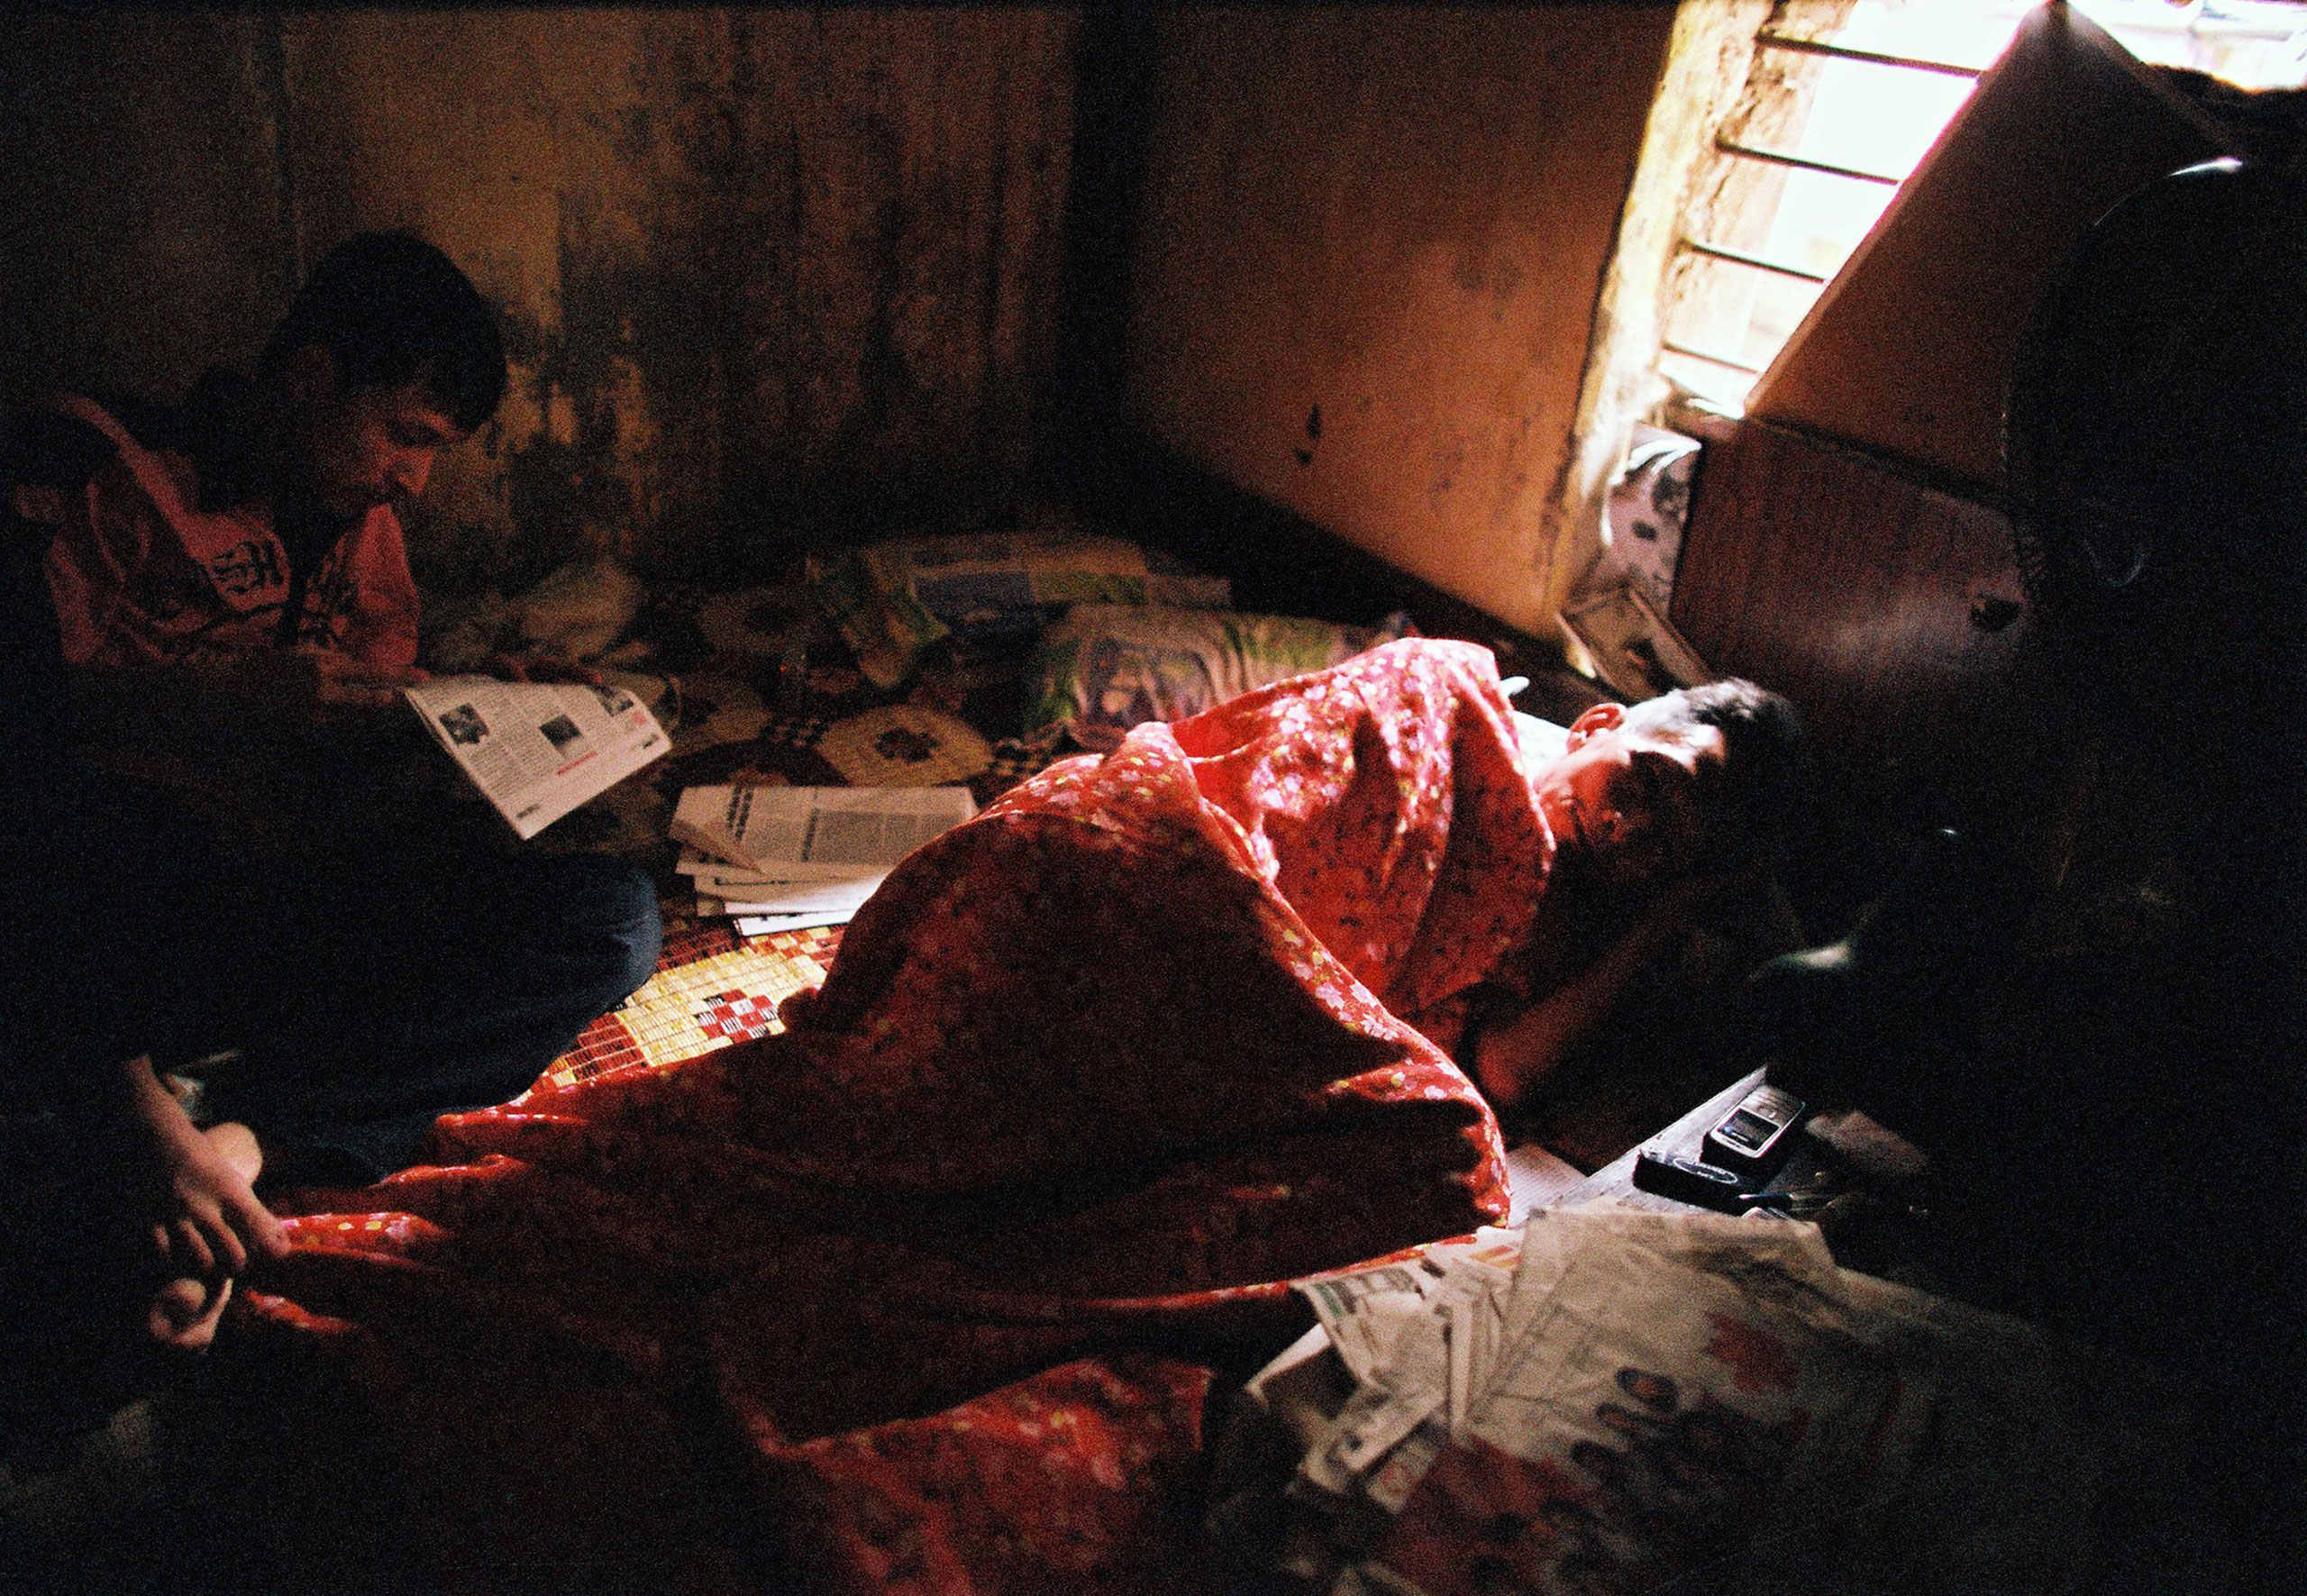 An elderly man sleeps while his son reads newspaper in their tiny room in Hanoi, March 23, 2010.